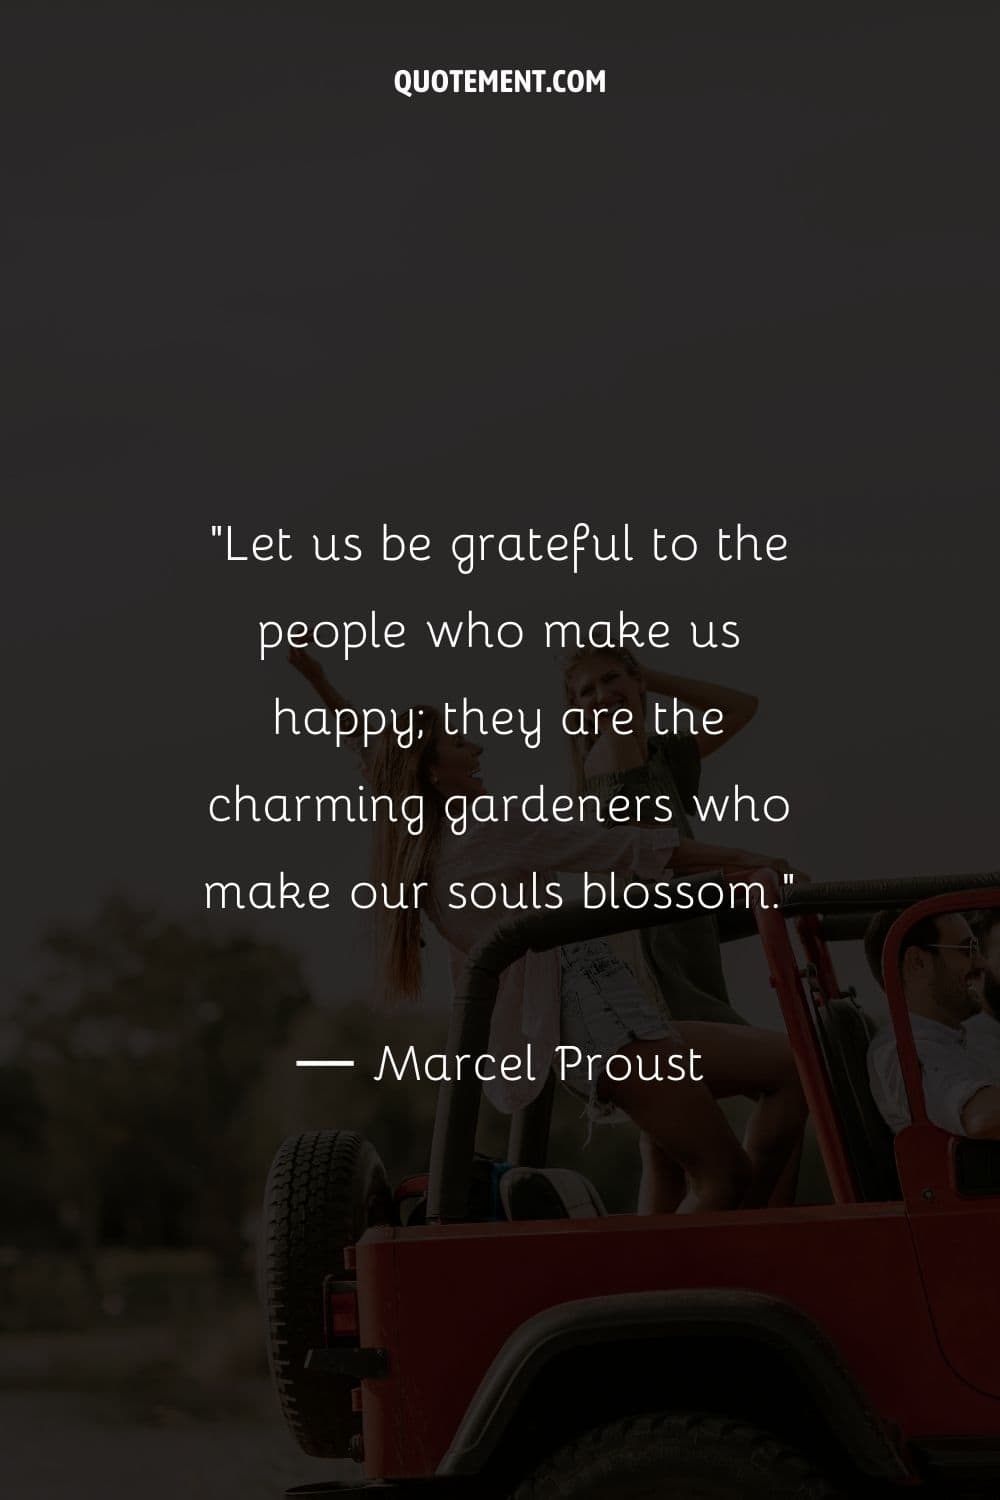 Let us be grateful to the people who make us happy; they are the charming gardeners who make our souls blossom